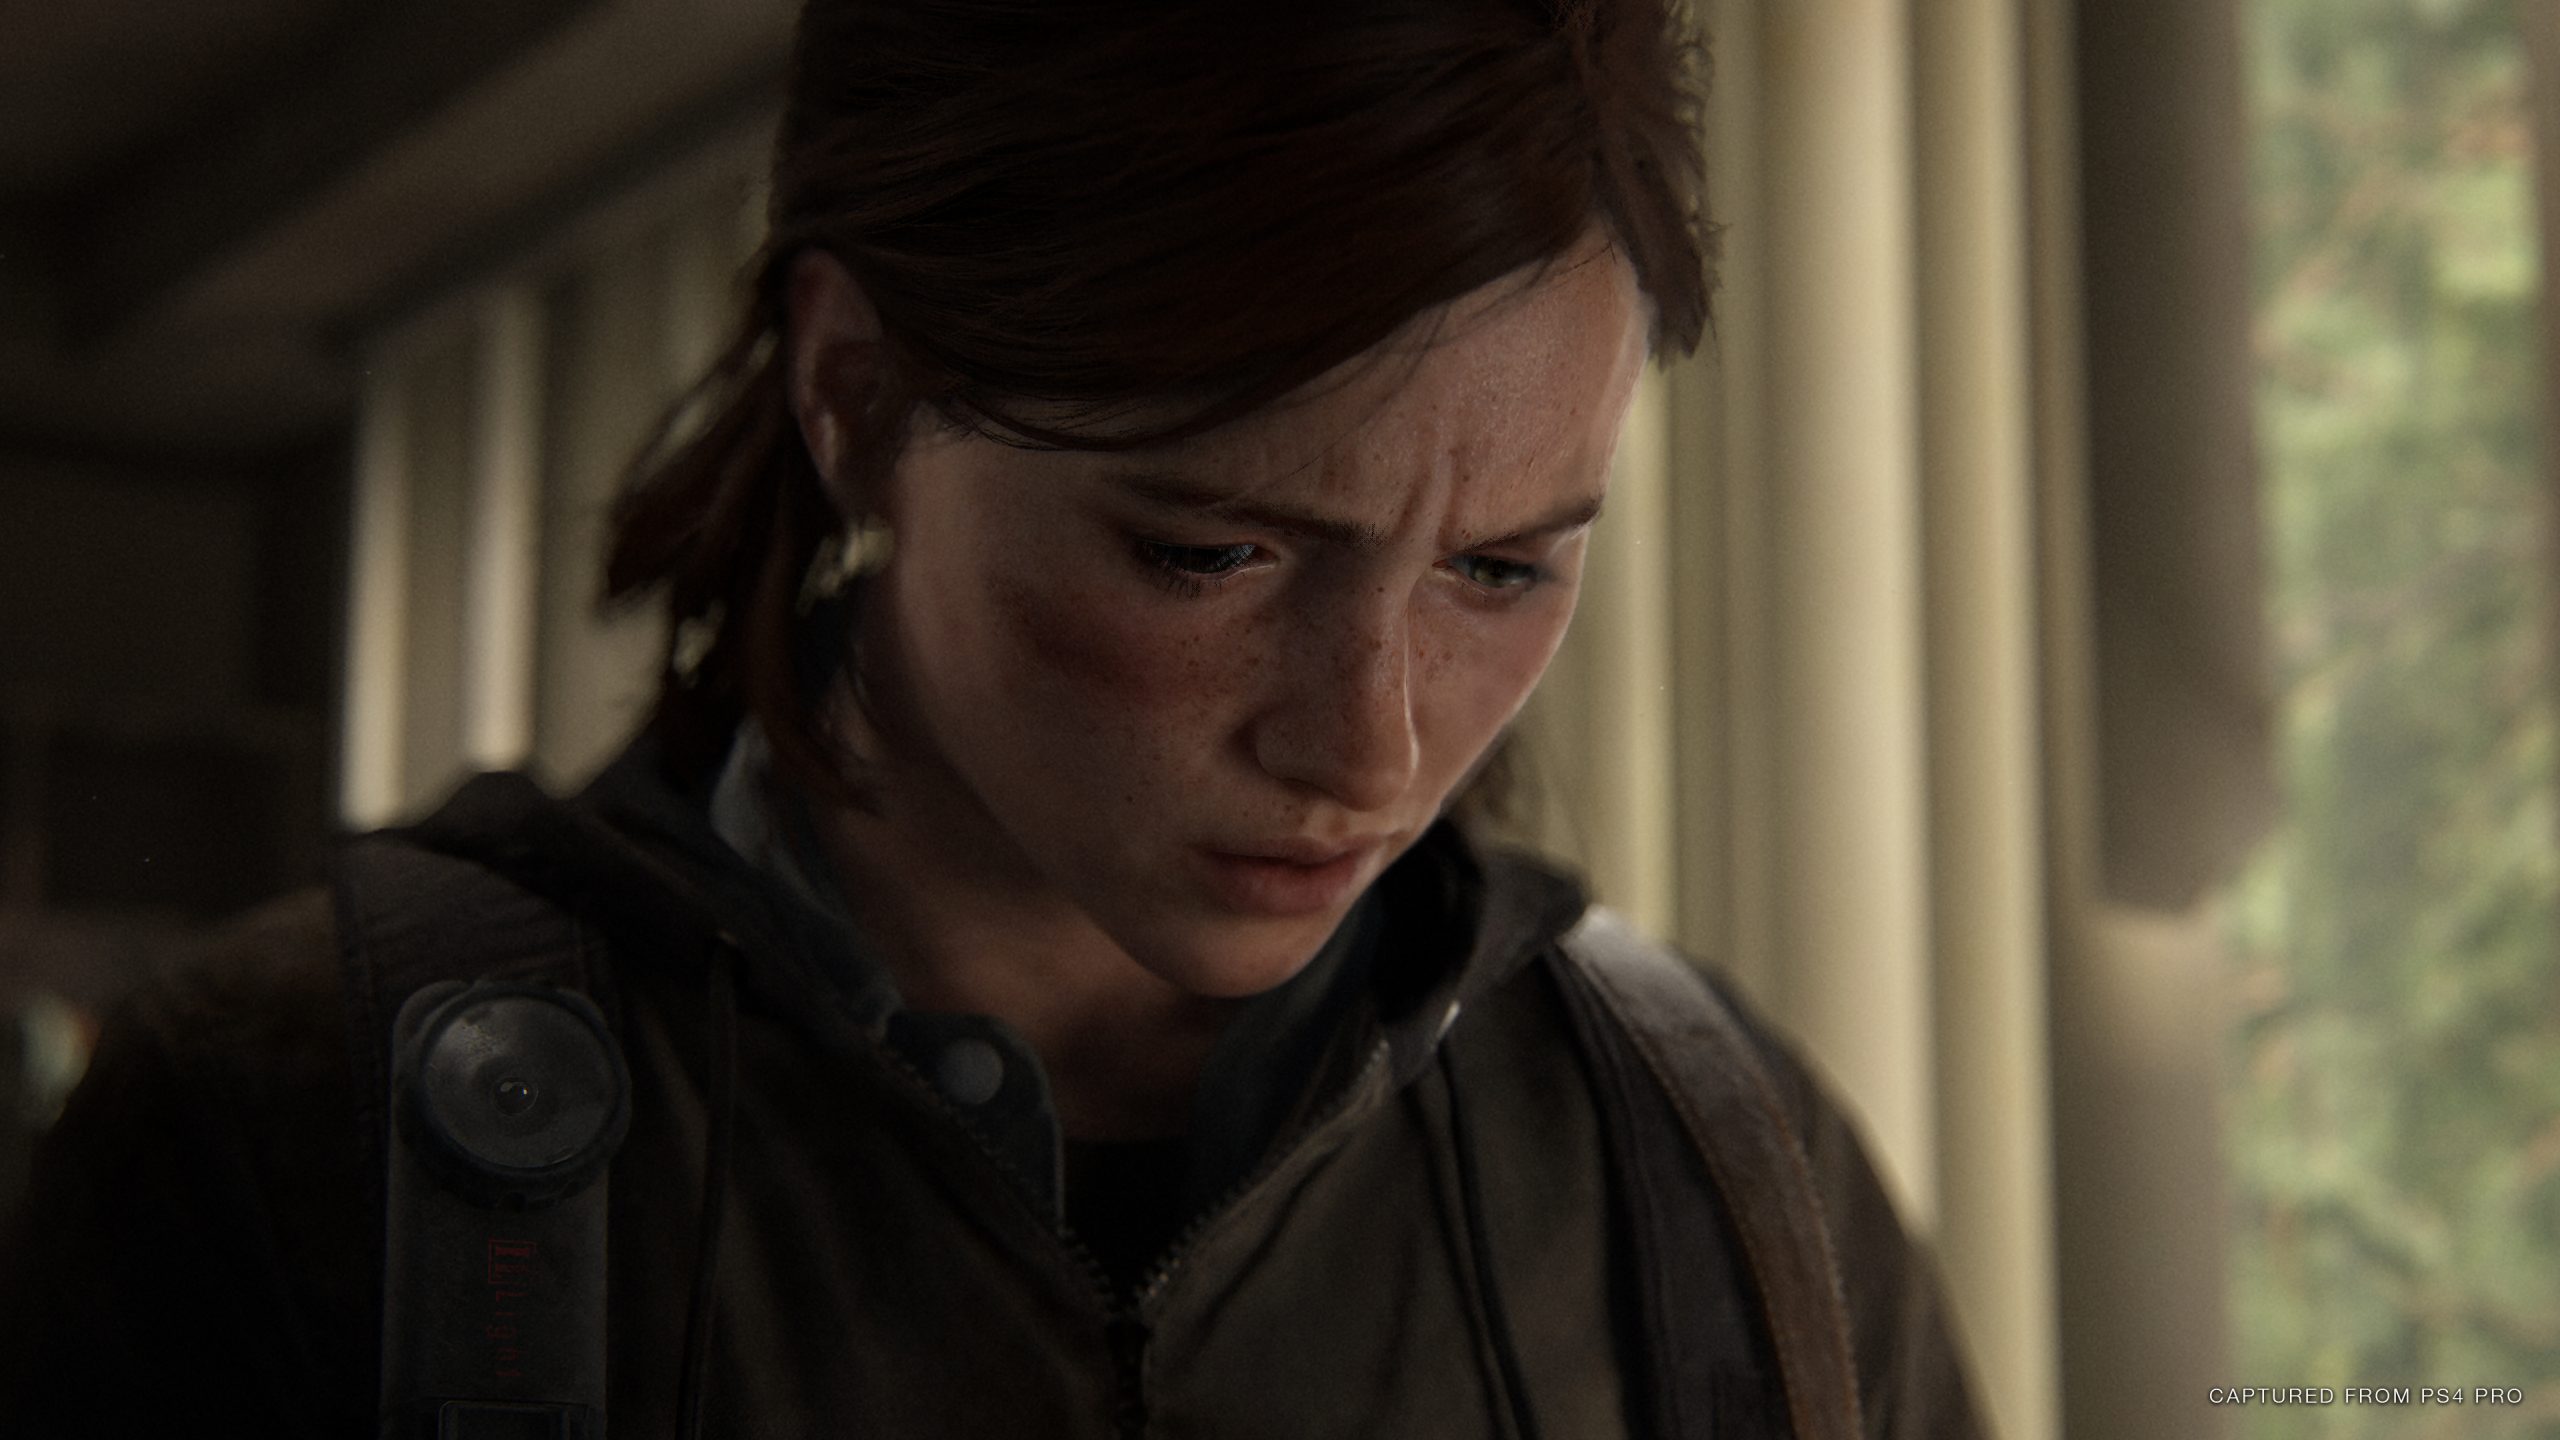 The Last of Us 2: All Faces Ellie Can Pull in the Mirror